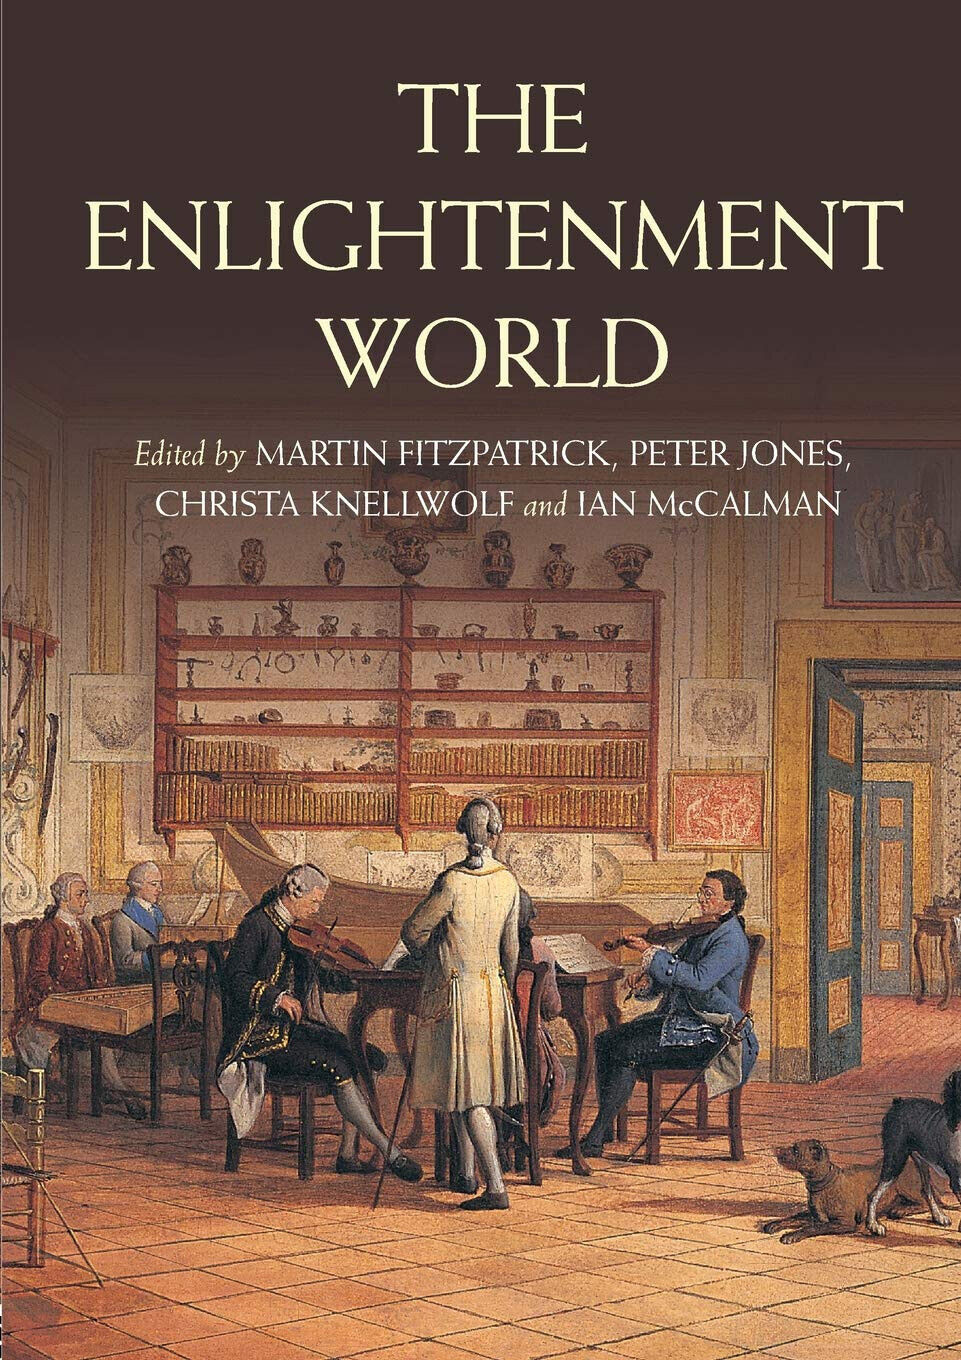 The Enlightenment World - Martin Fitzpatrick - Routledge, 2006